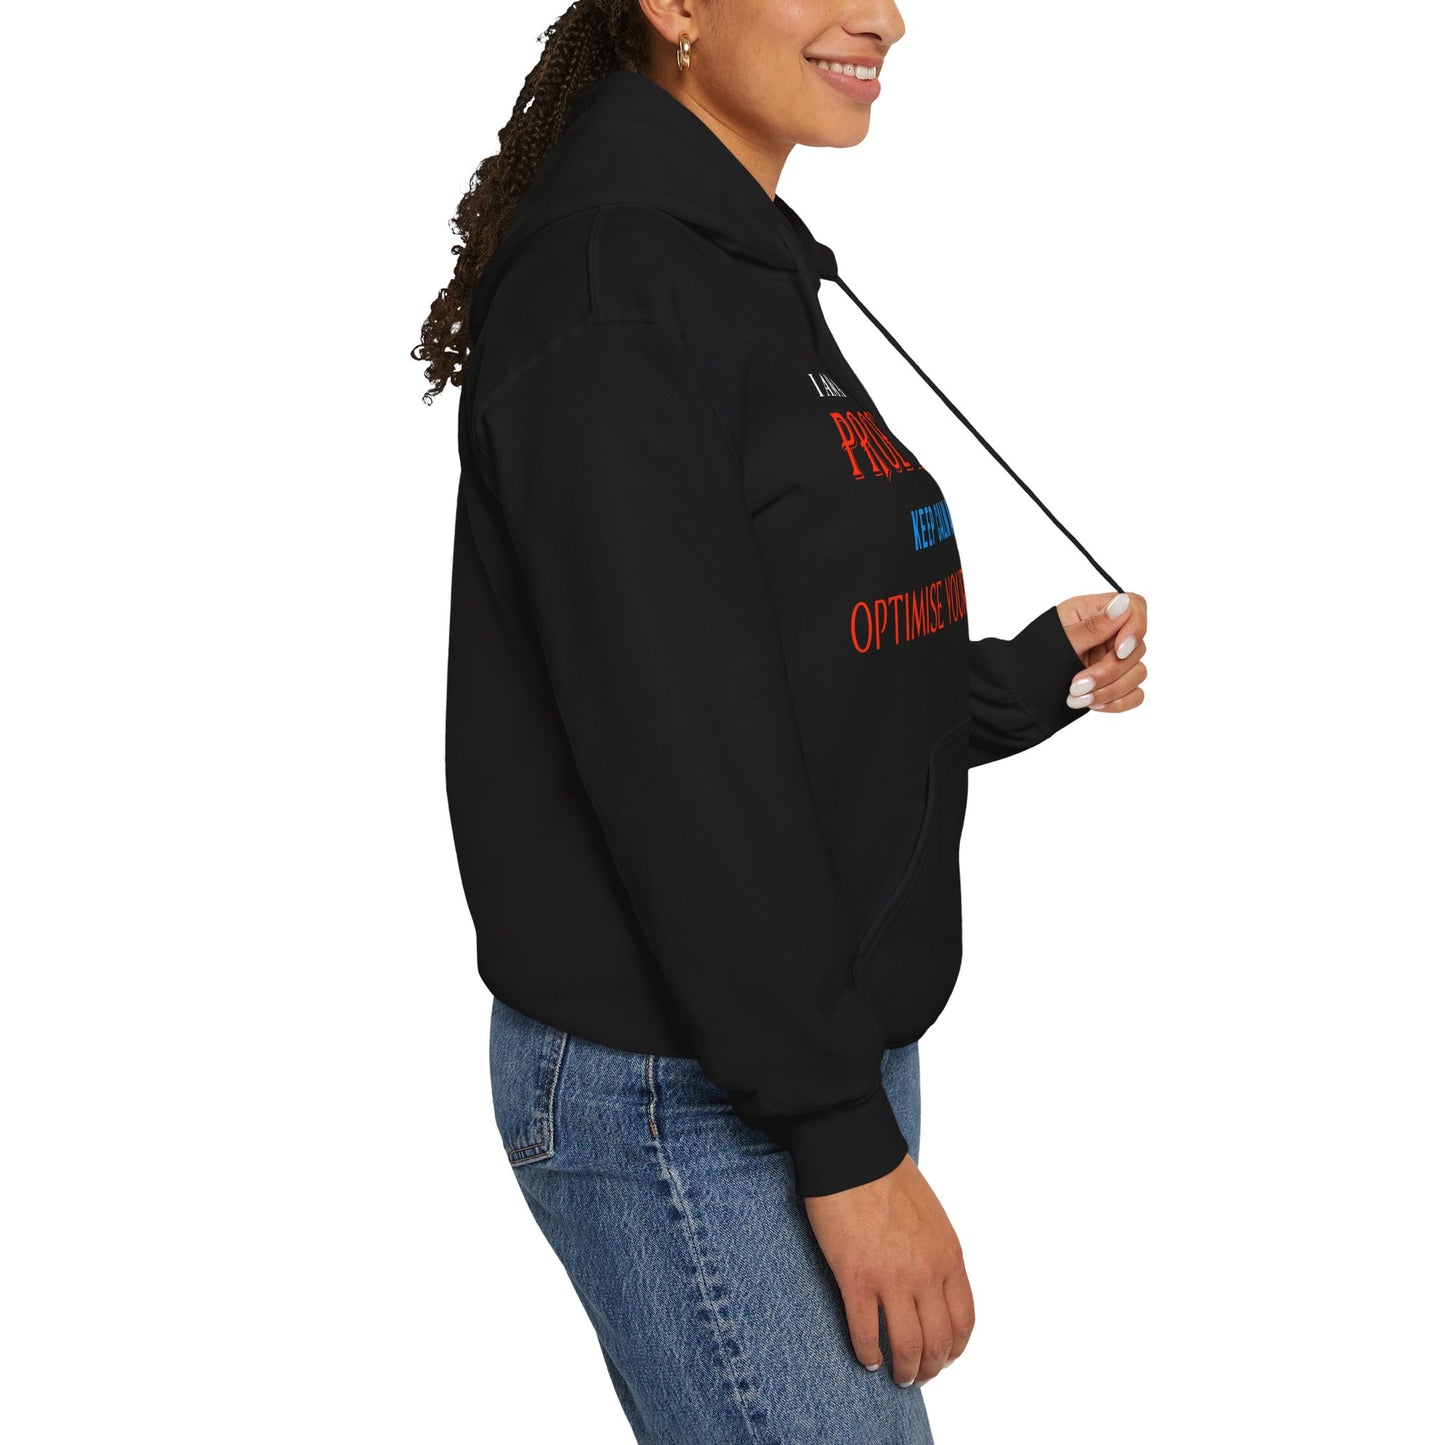 Dr. Flowers' Elevate Your Impact Inspirational Quote Unisex Hoodie